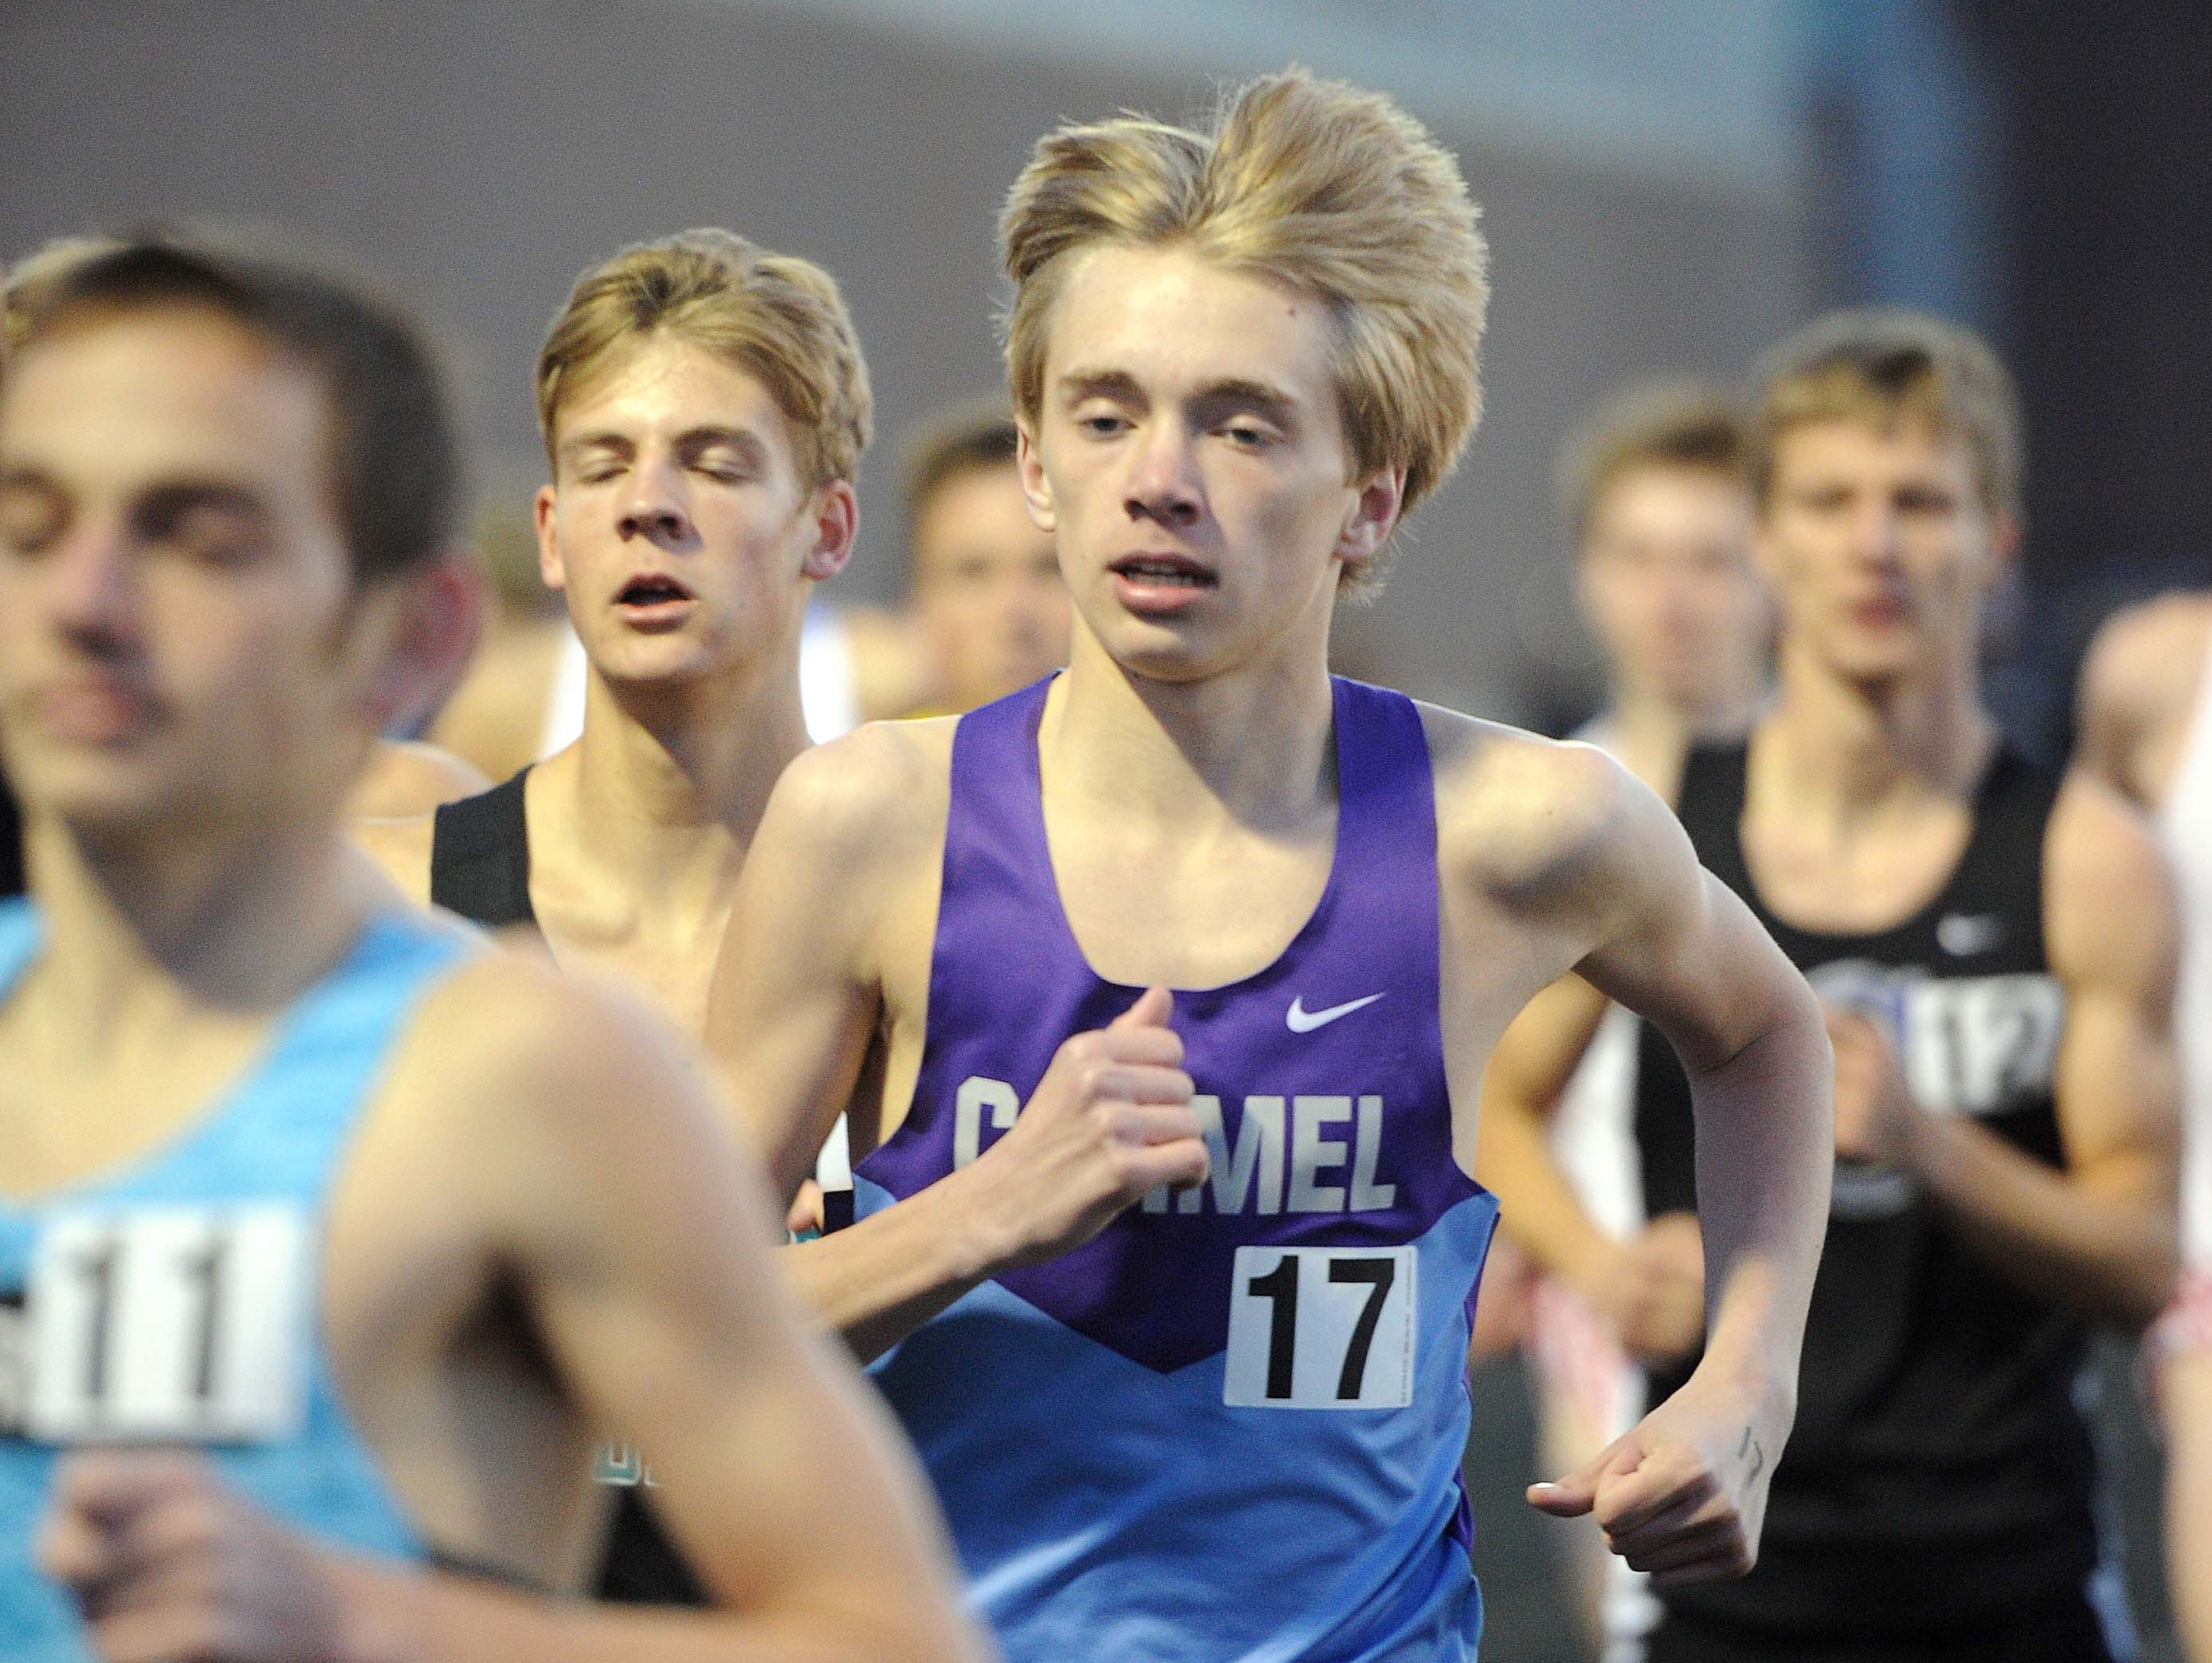 Carmel's Ben Veatch in a race in 2014, when he was the state boys cross country champion.